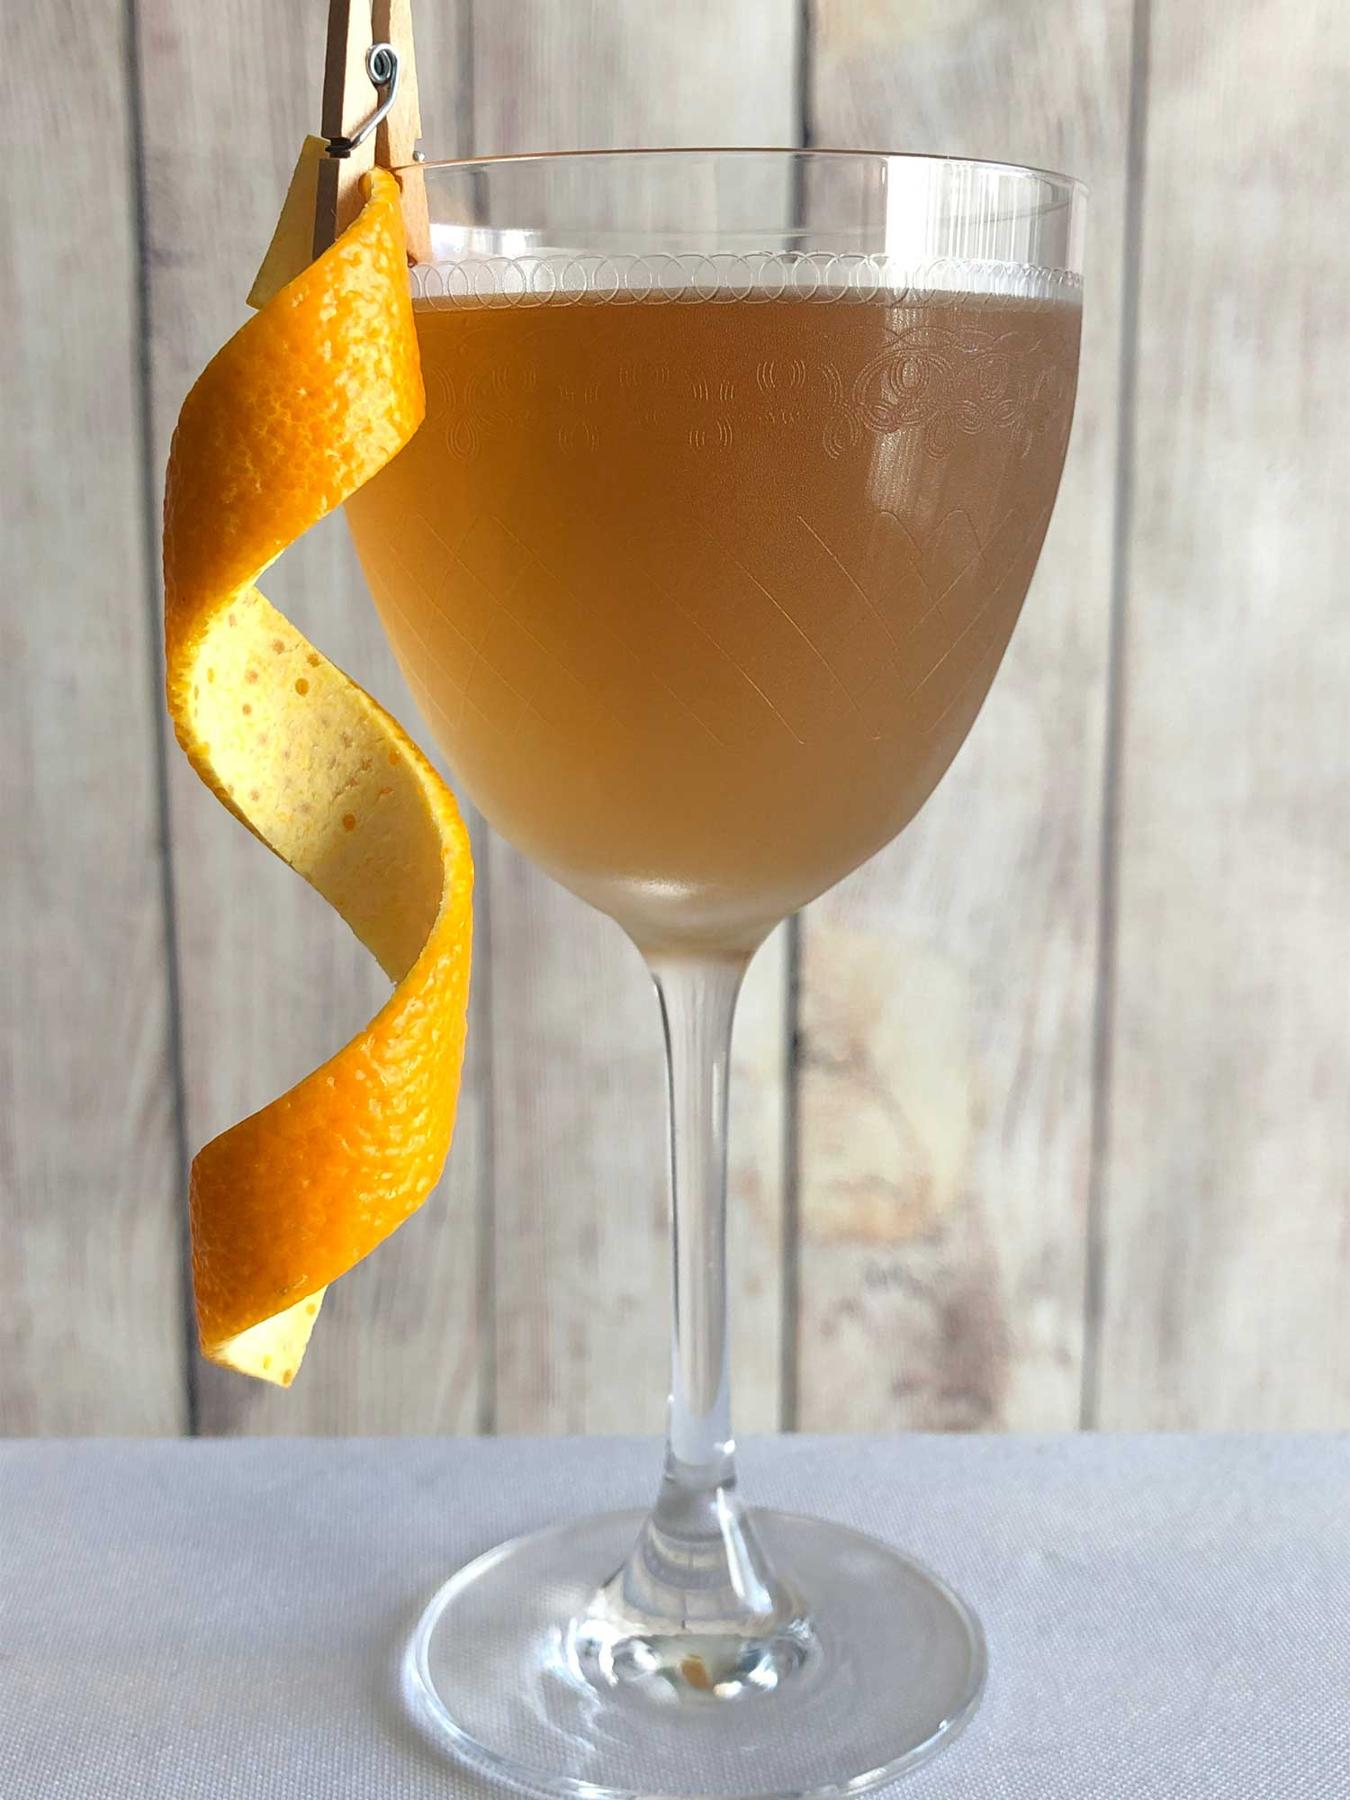 An example of the Future Perfect, the mixed drink (drink) featuring Hayman’s Old Tom Gin, Dolin Dry Vermouth de Chambéry, Dolin Rouge Vermouth de Chambéry, and orange twist; photo by Lee Edwards